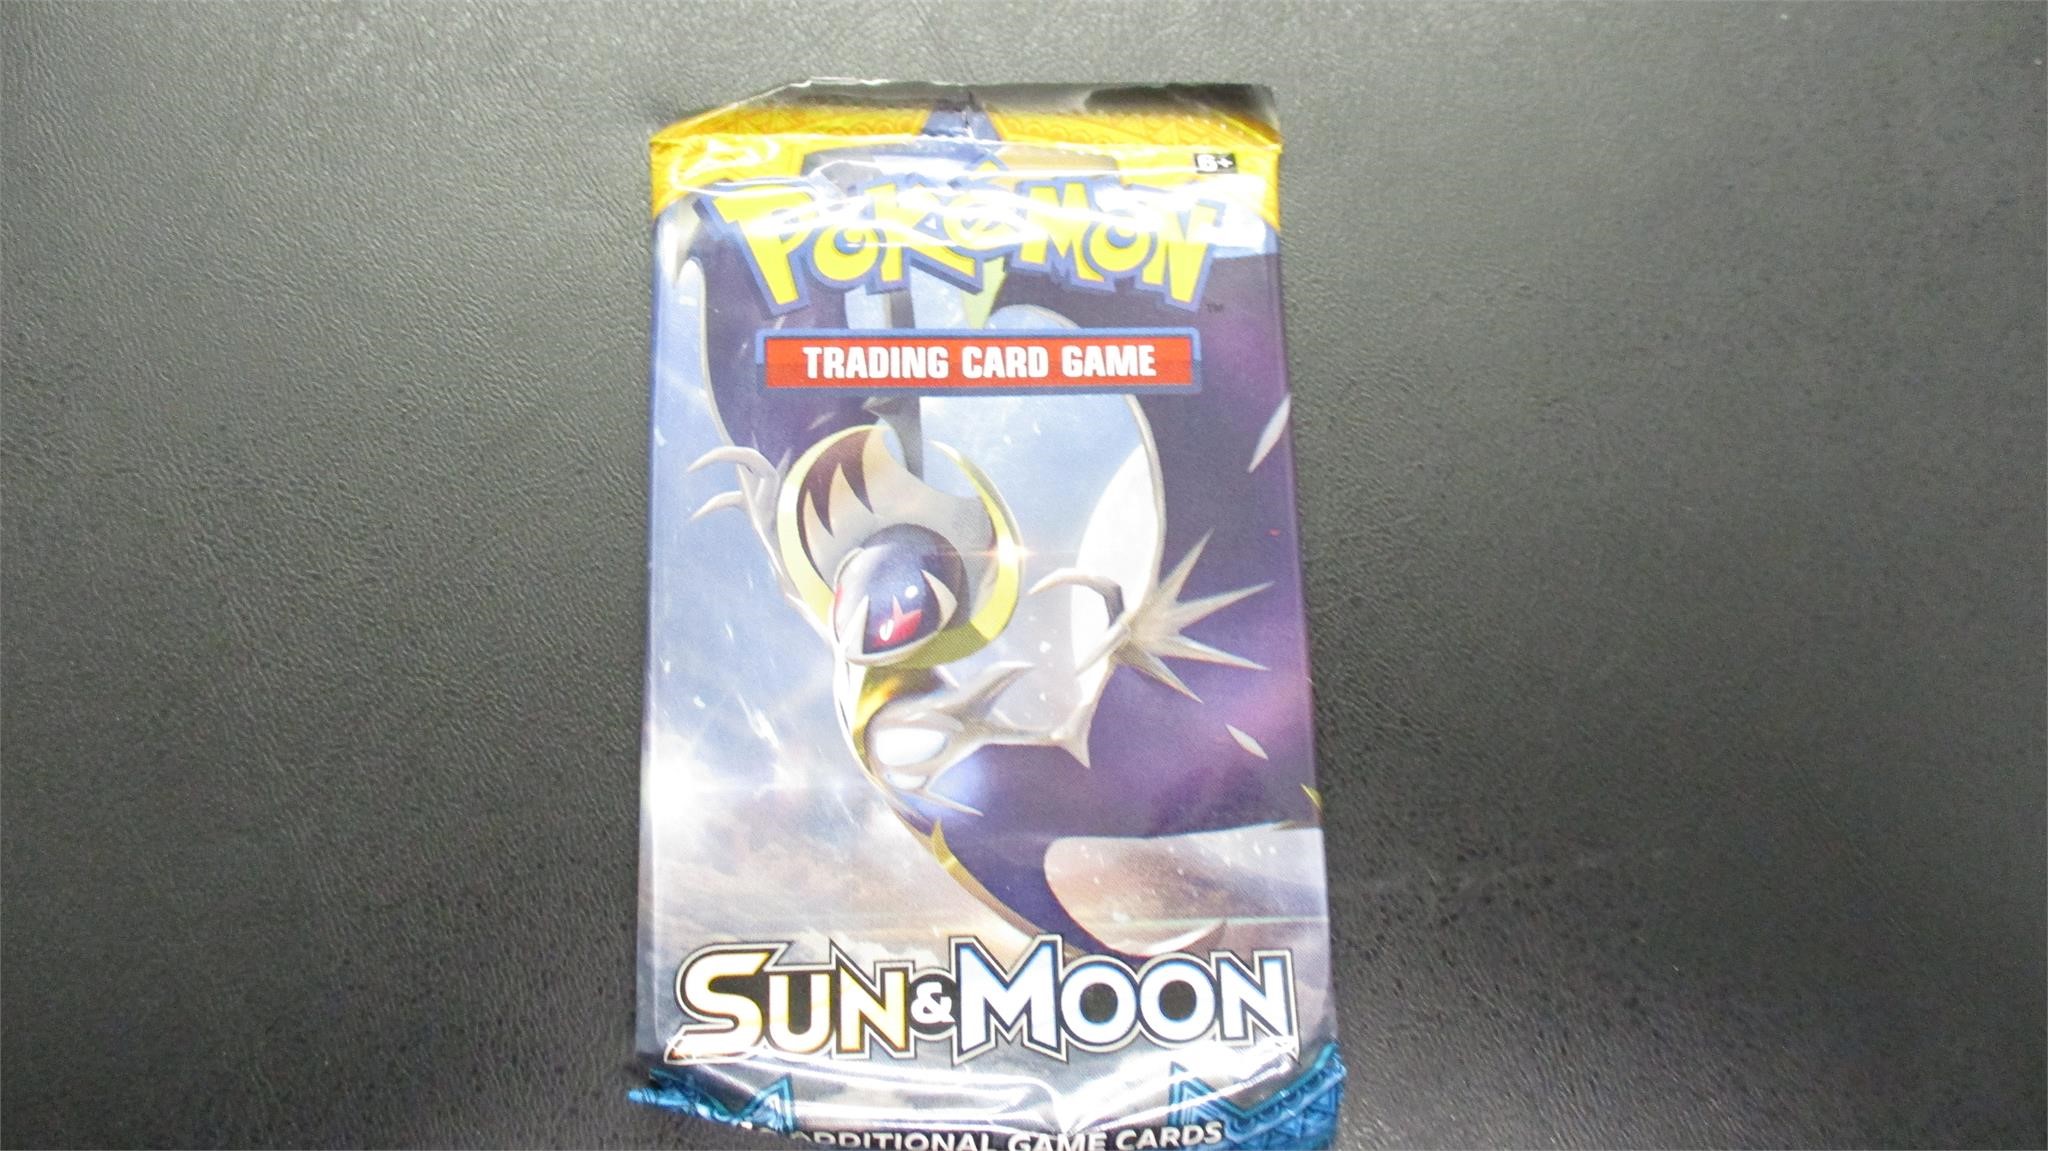 Coins, Magic Cards, Pokemon Cards, and More!